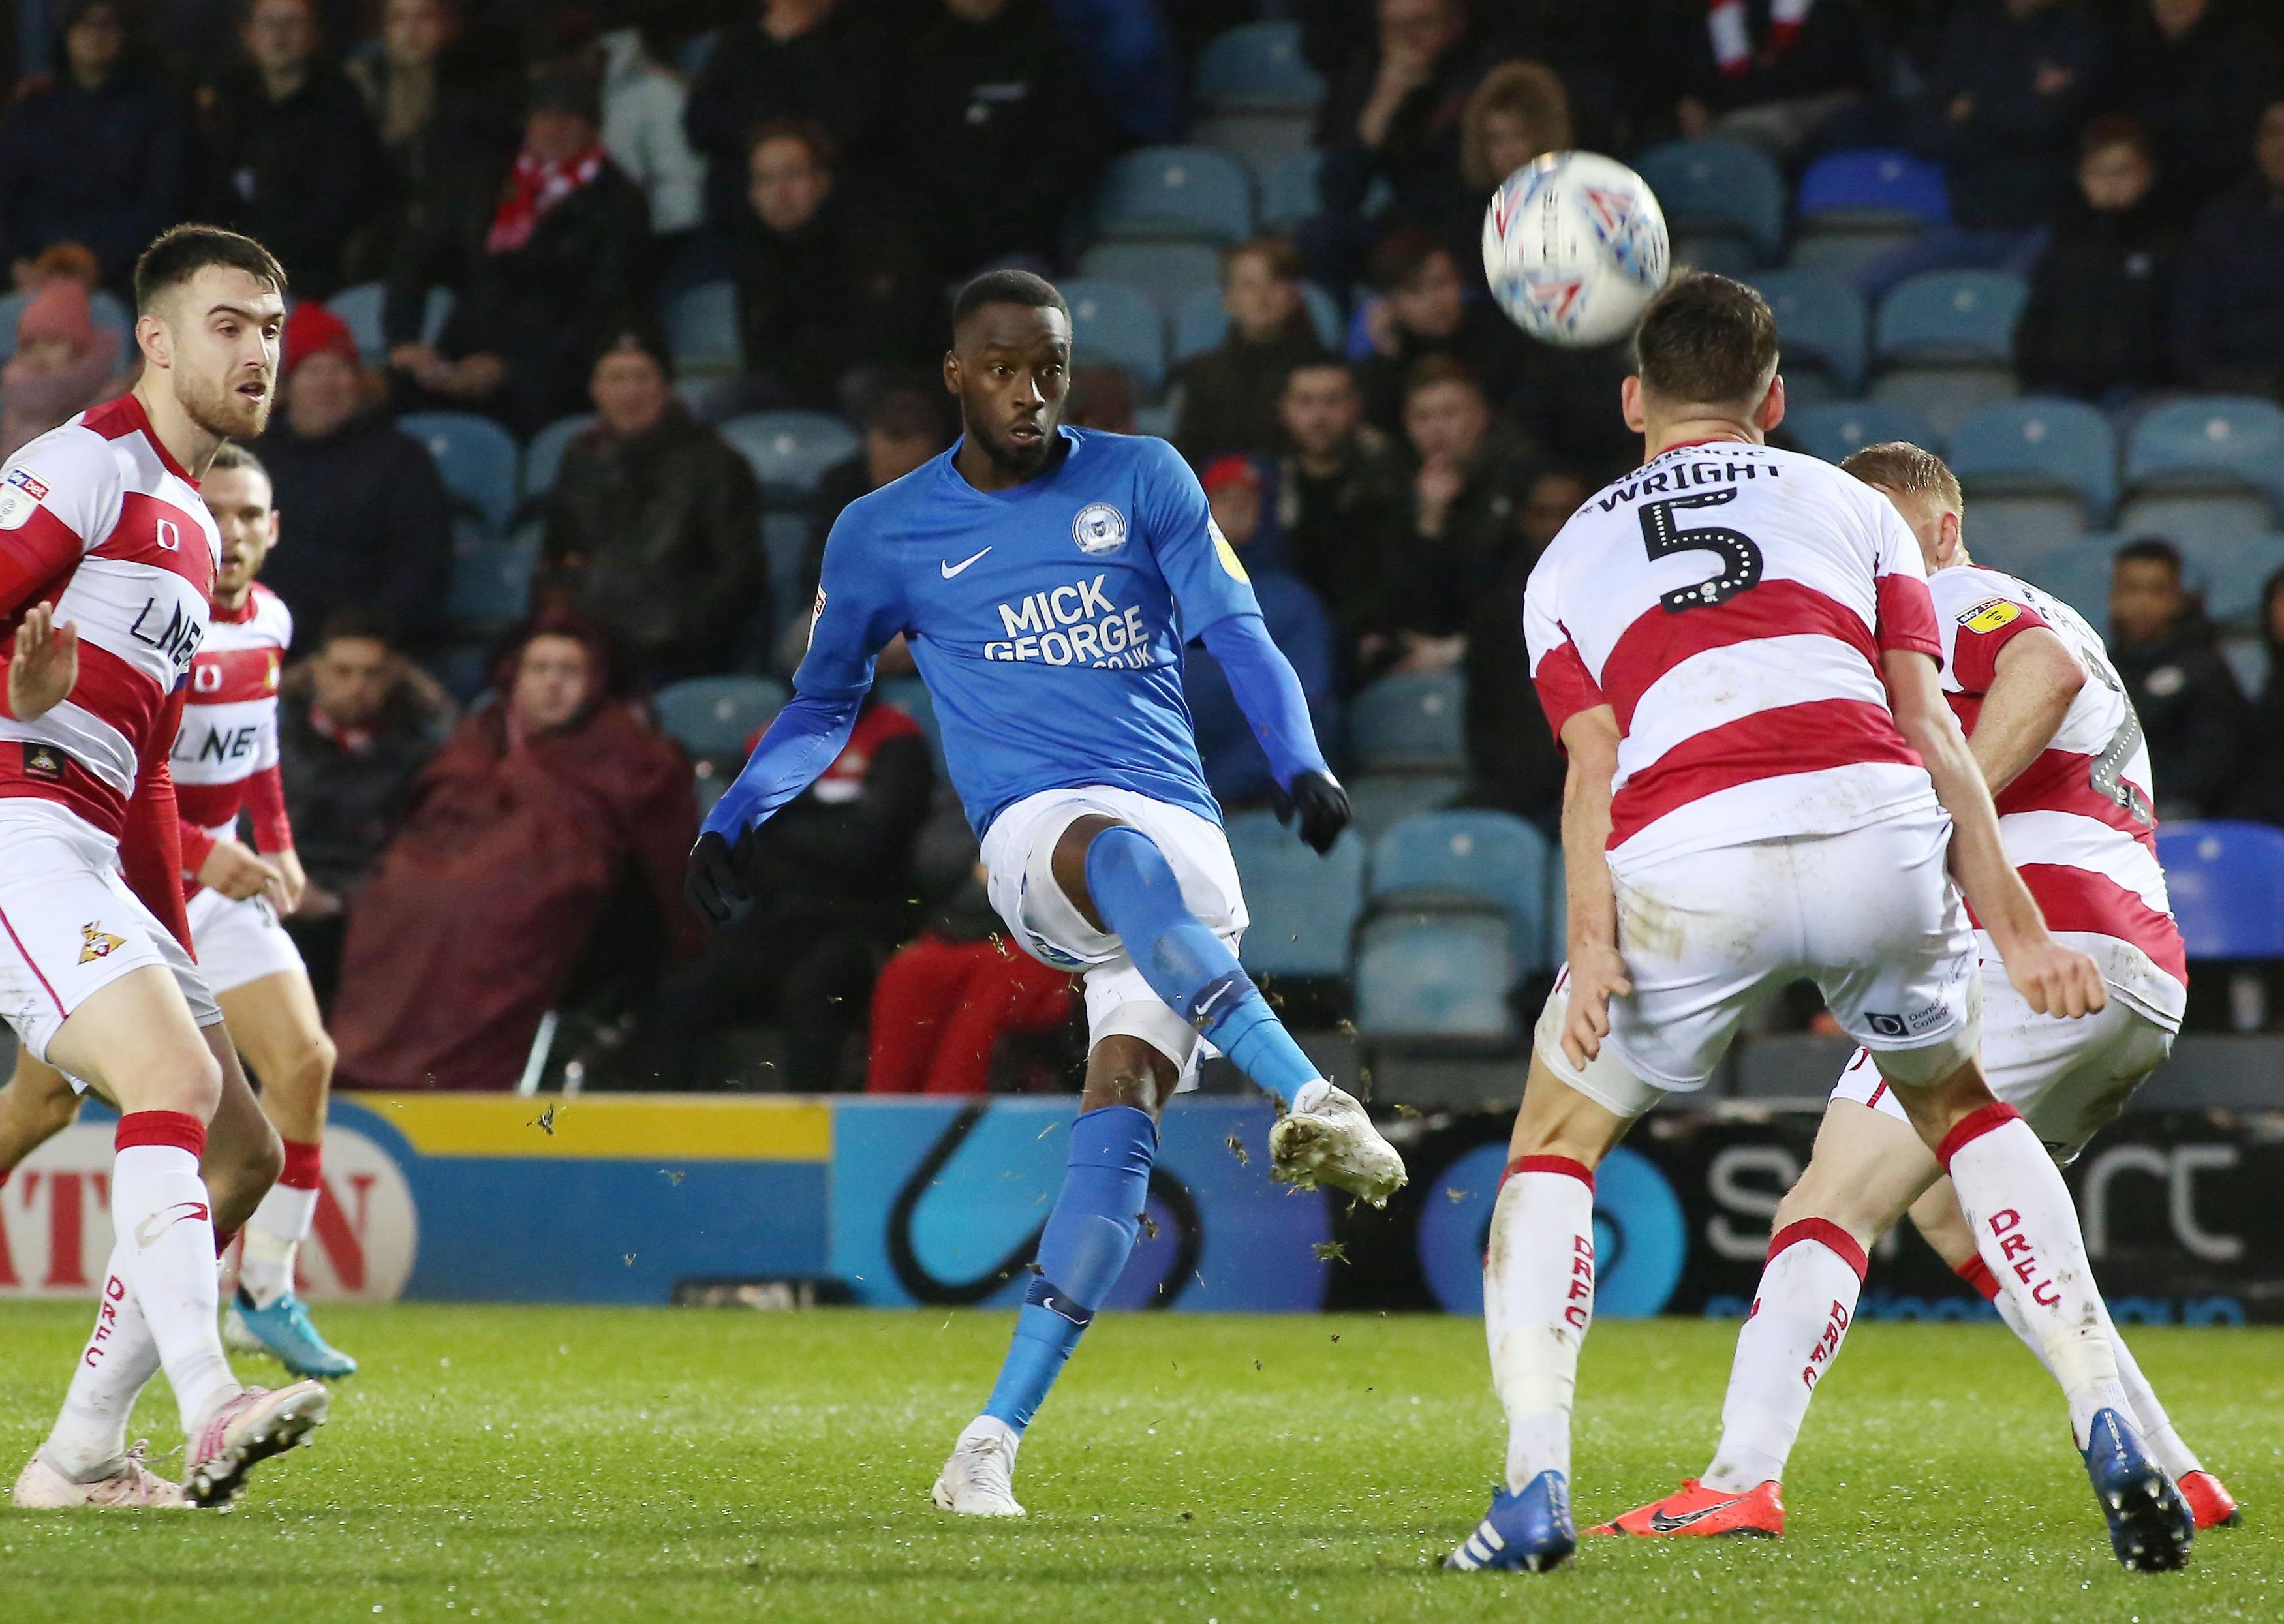 Mohamed Eisa of Peterborough United shoots at goal against Doncaster Rovers. Photo: Joe Dent/theposh.com.